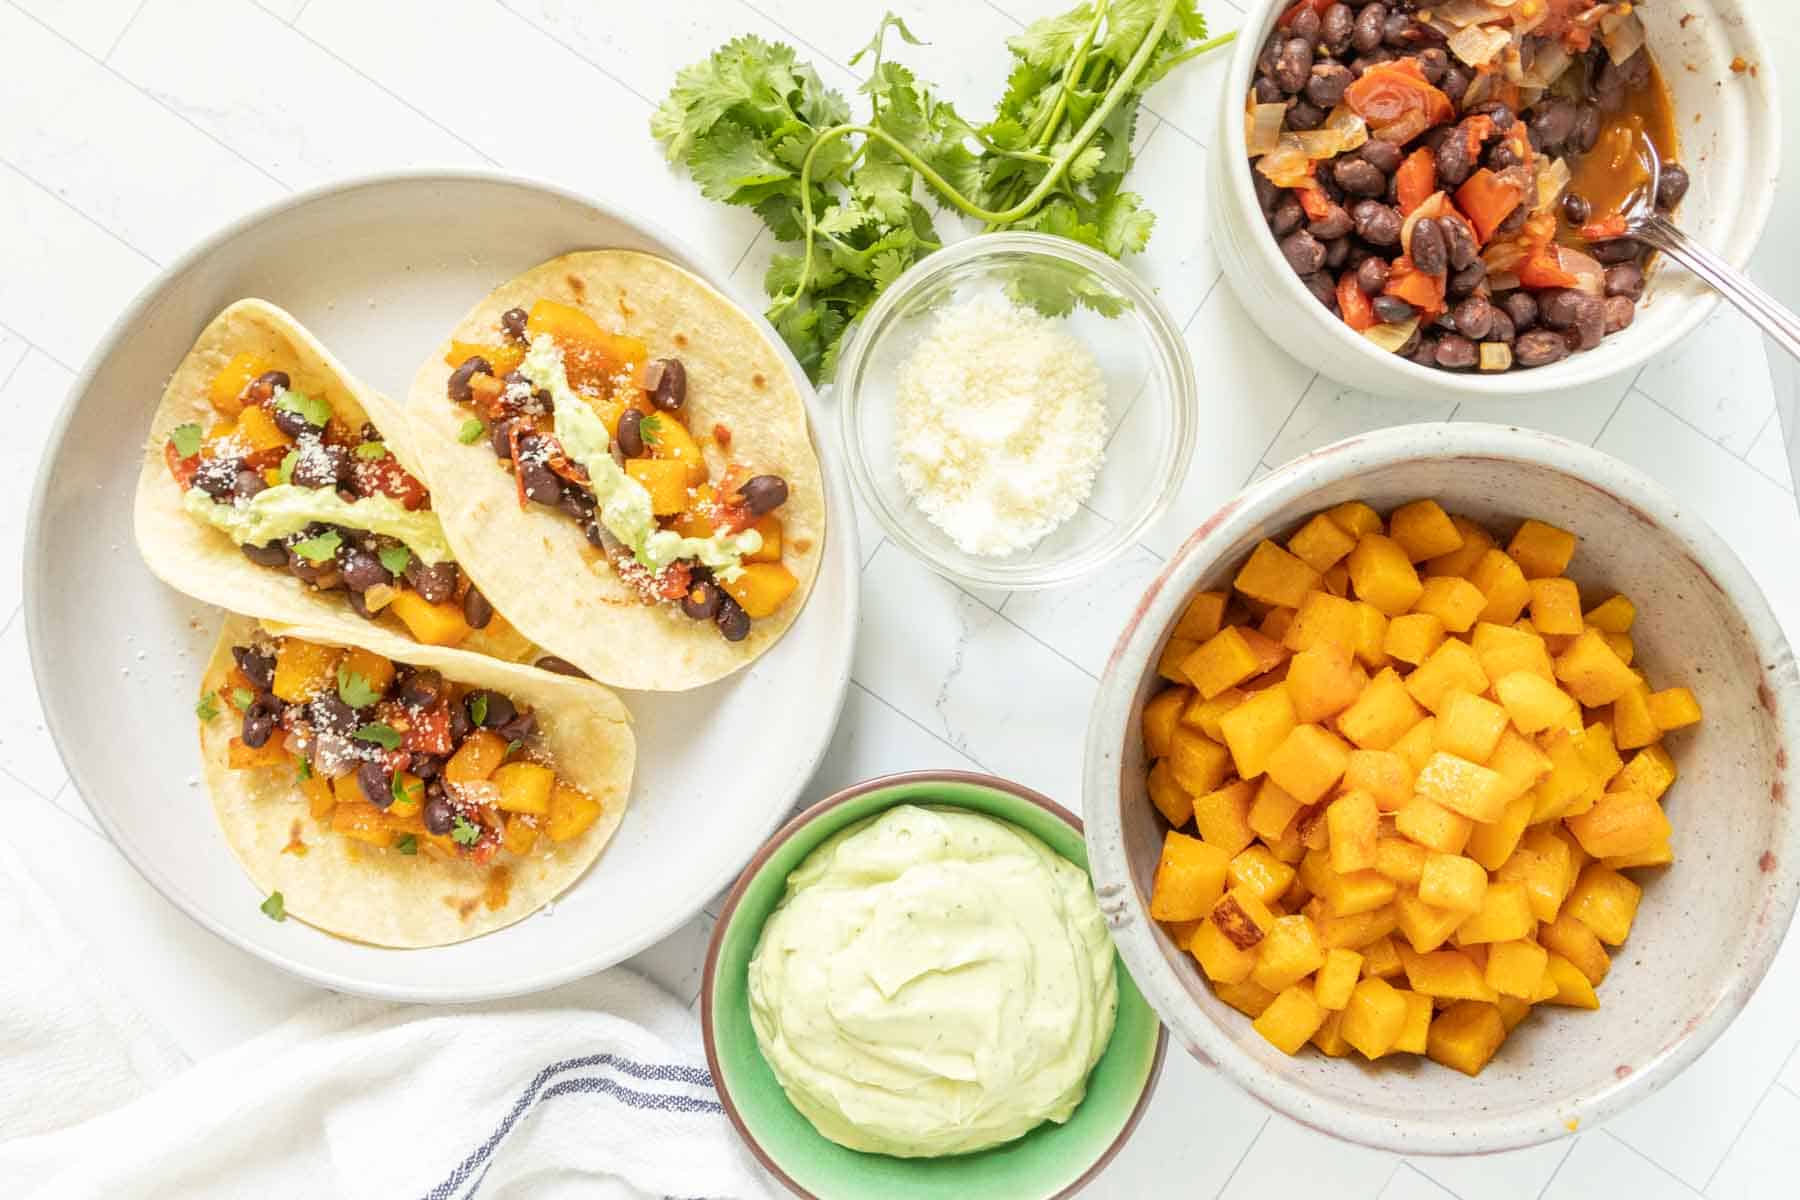 Mexican tacos with black beans, squash and guacamole.